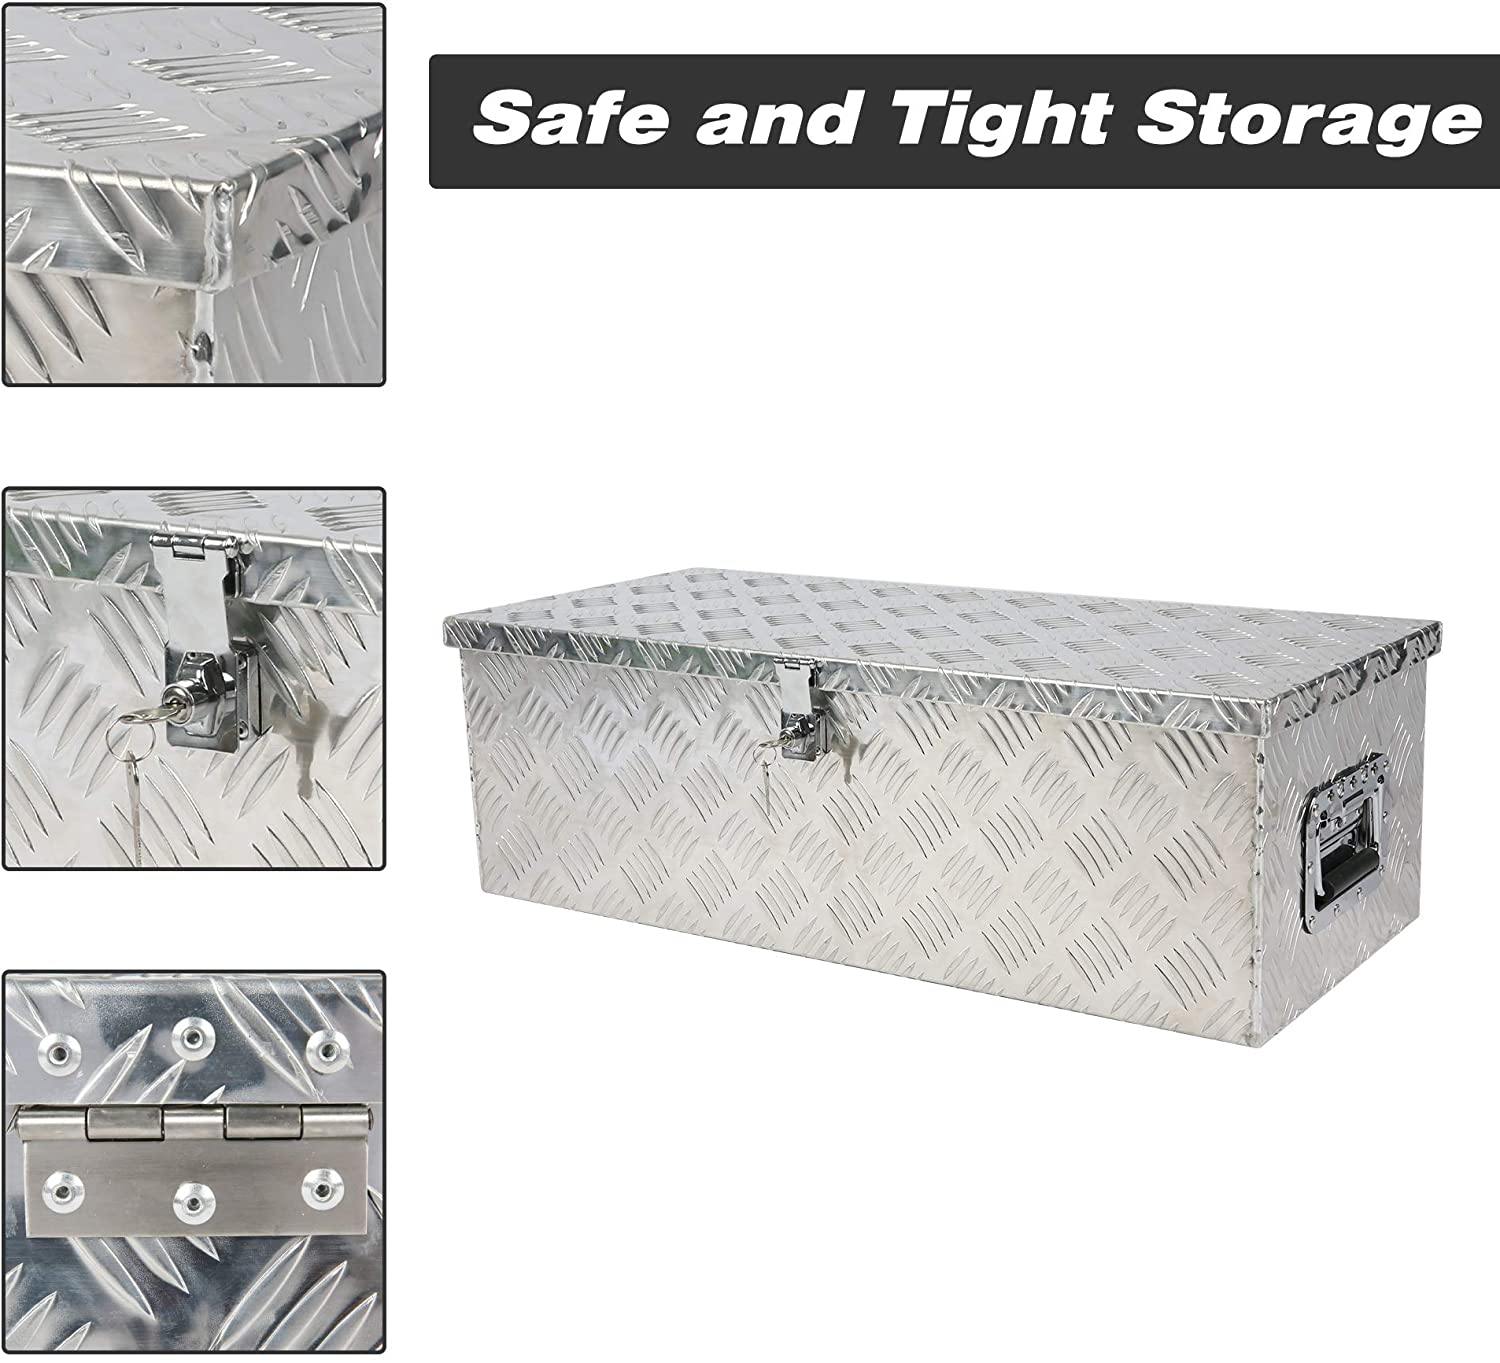 30 x 13 x 10 Inches Pick Up Trailer Truck Bed Tool Box Trailer Storage –